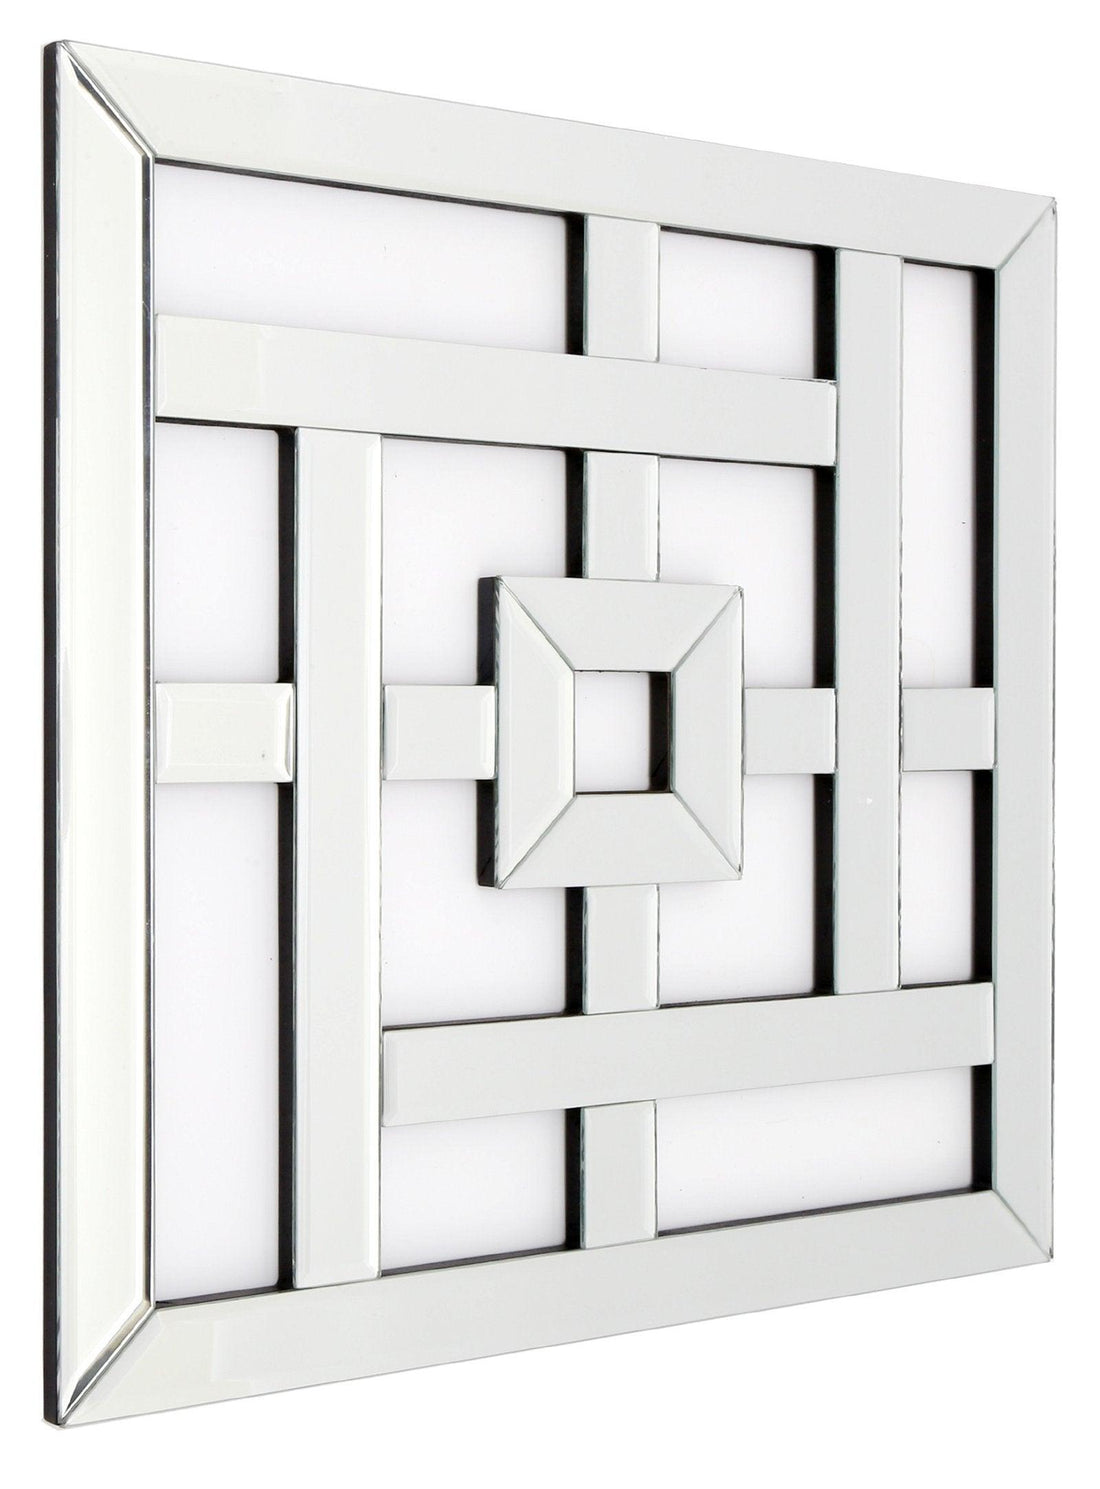 Mirrored Wall Decoration, 40cm. - £53.99 - Mirrors 